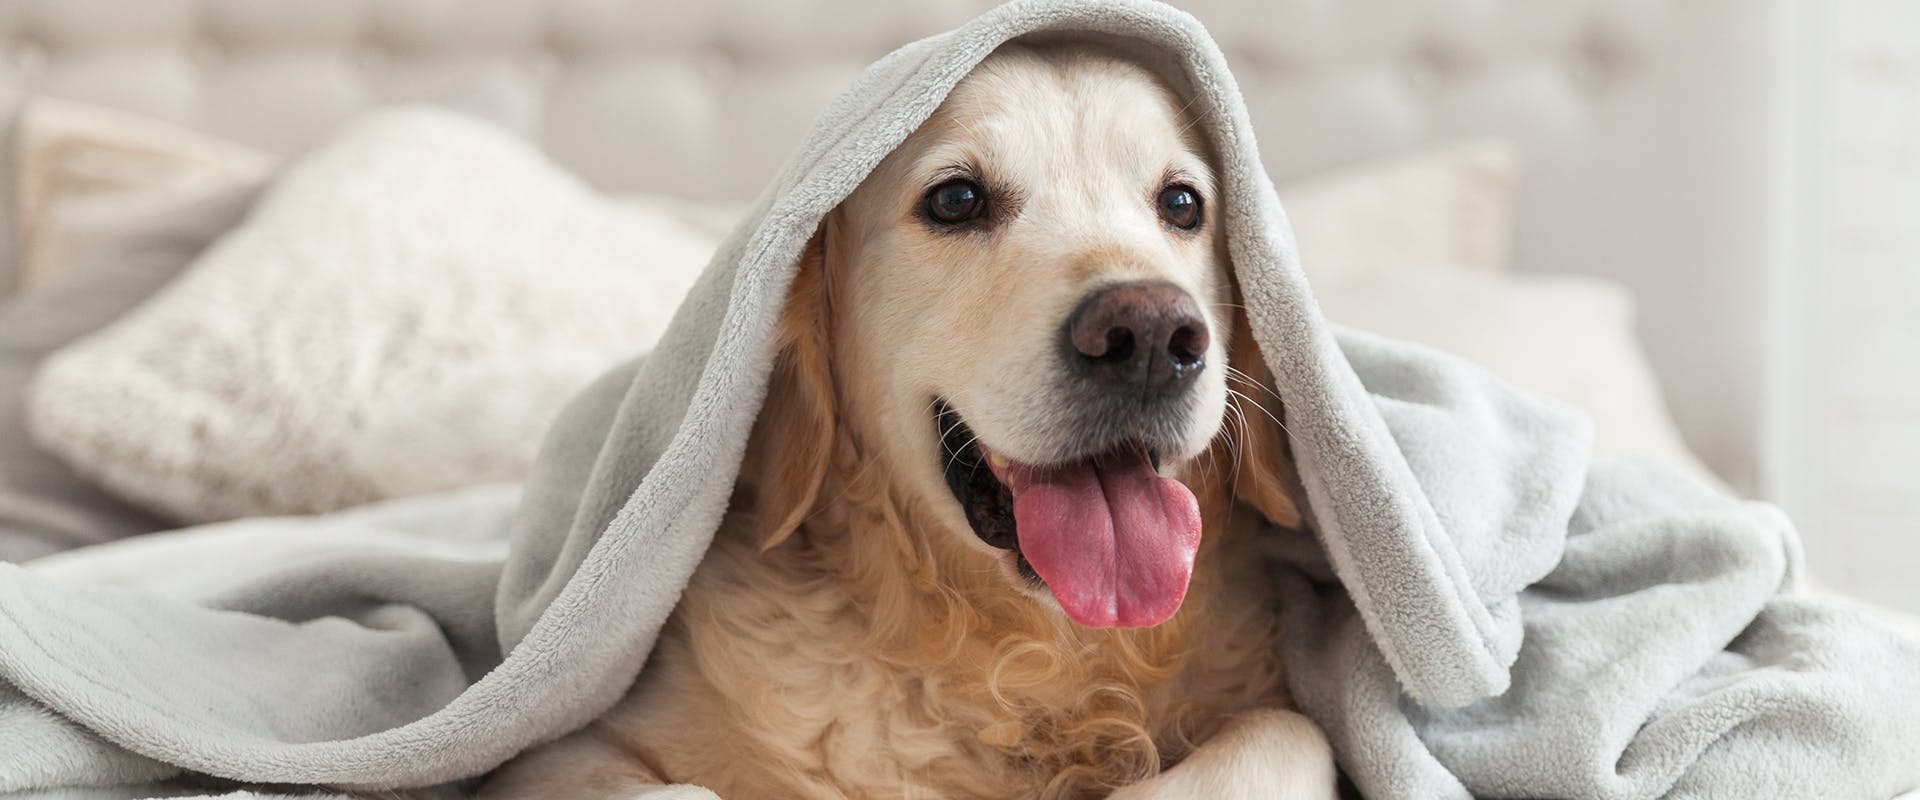 A Golden Retriever sitting on a bed, a grey blanket over is head